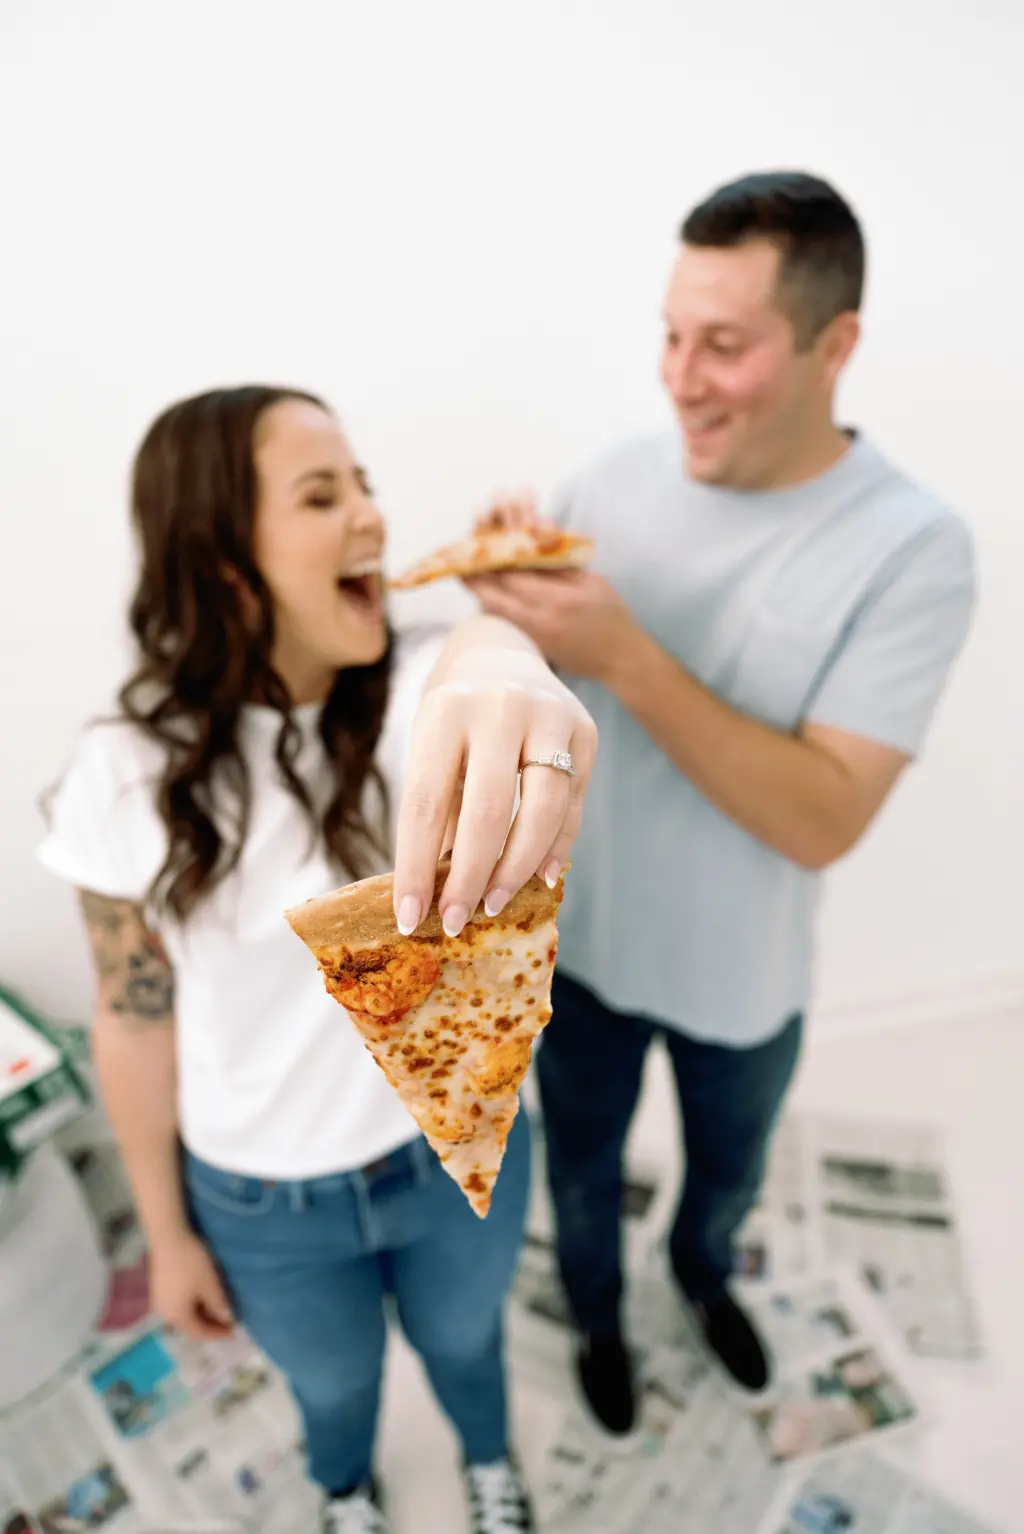 Casual Pizza Engagement Shoot | Tampa Bay Wedding Photographer Dewitt for Love Photography